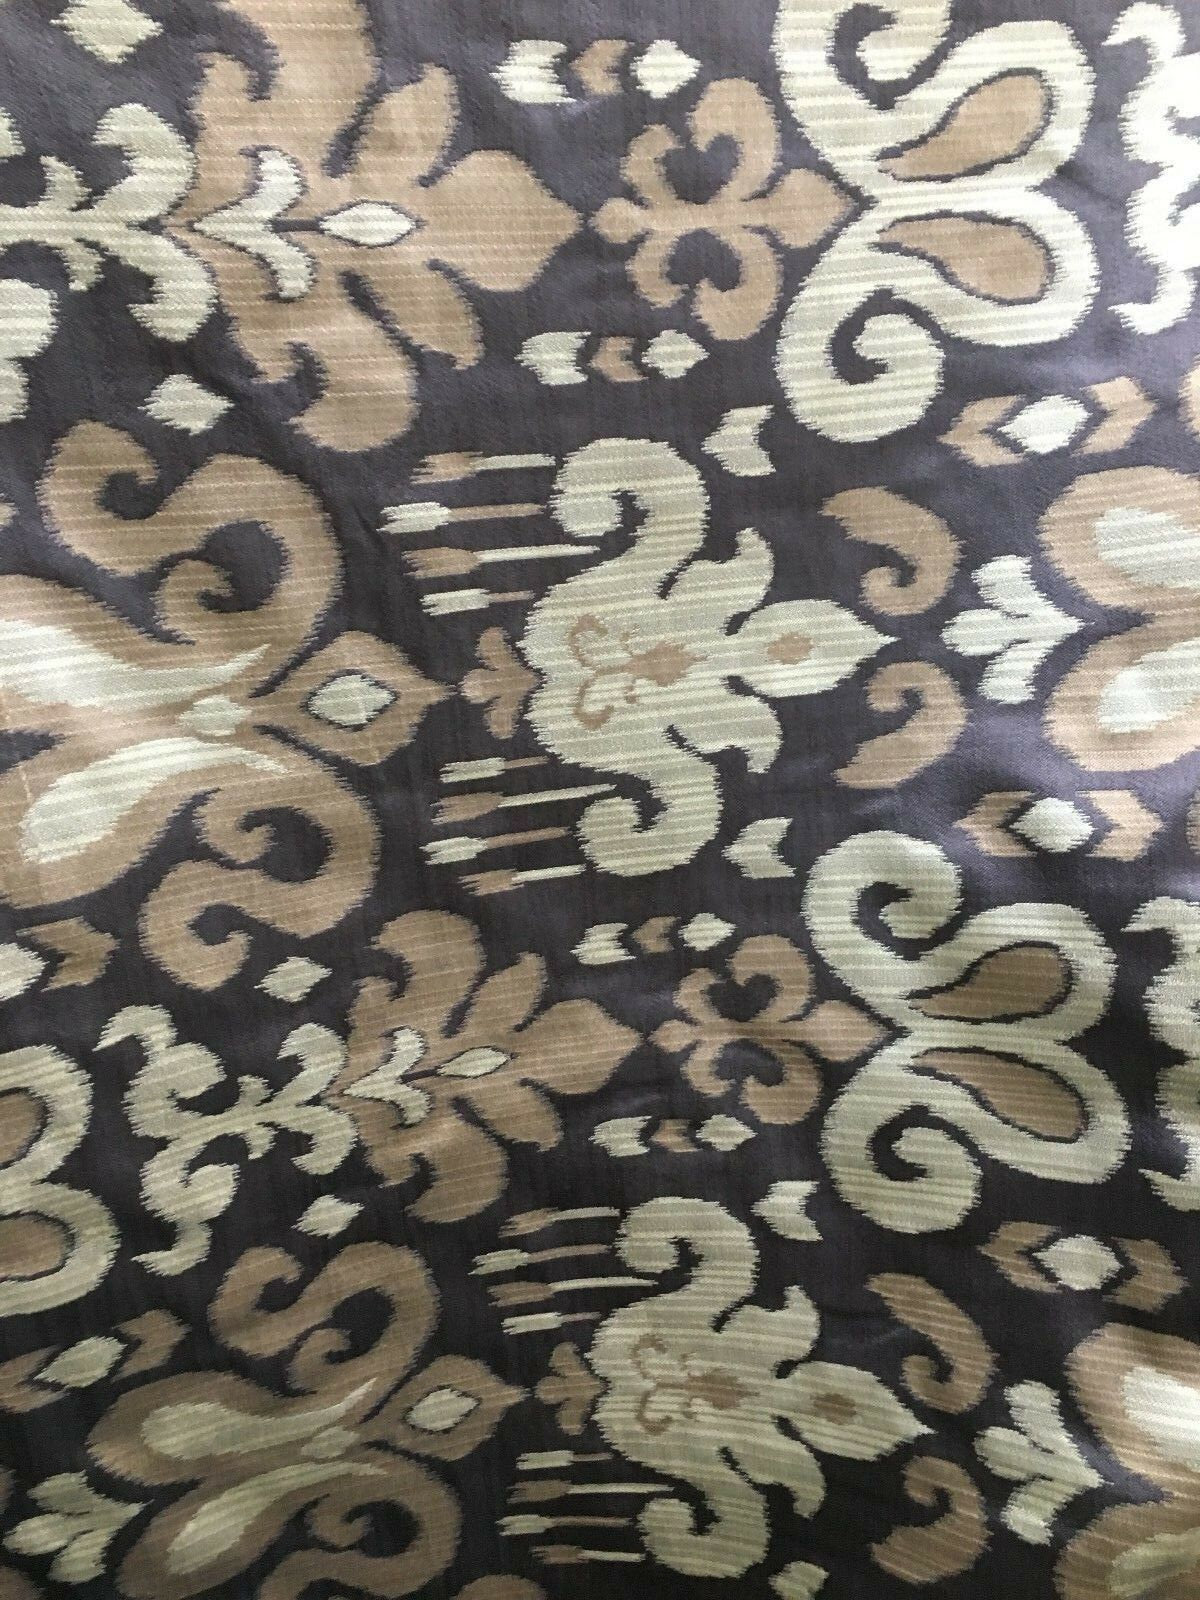 BROWN MULTICOLOR Brocade Upholstery Drapery Fabric (54 in.) Sold By The Yard